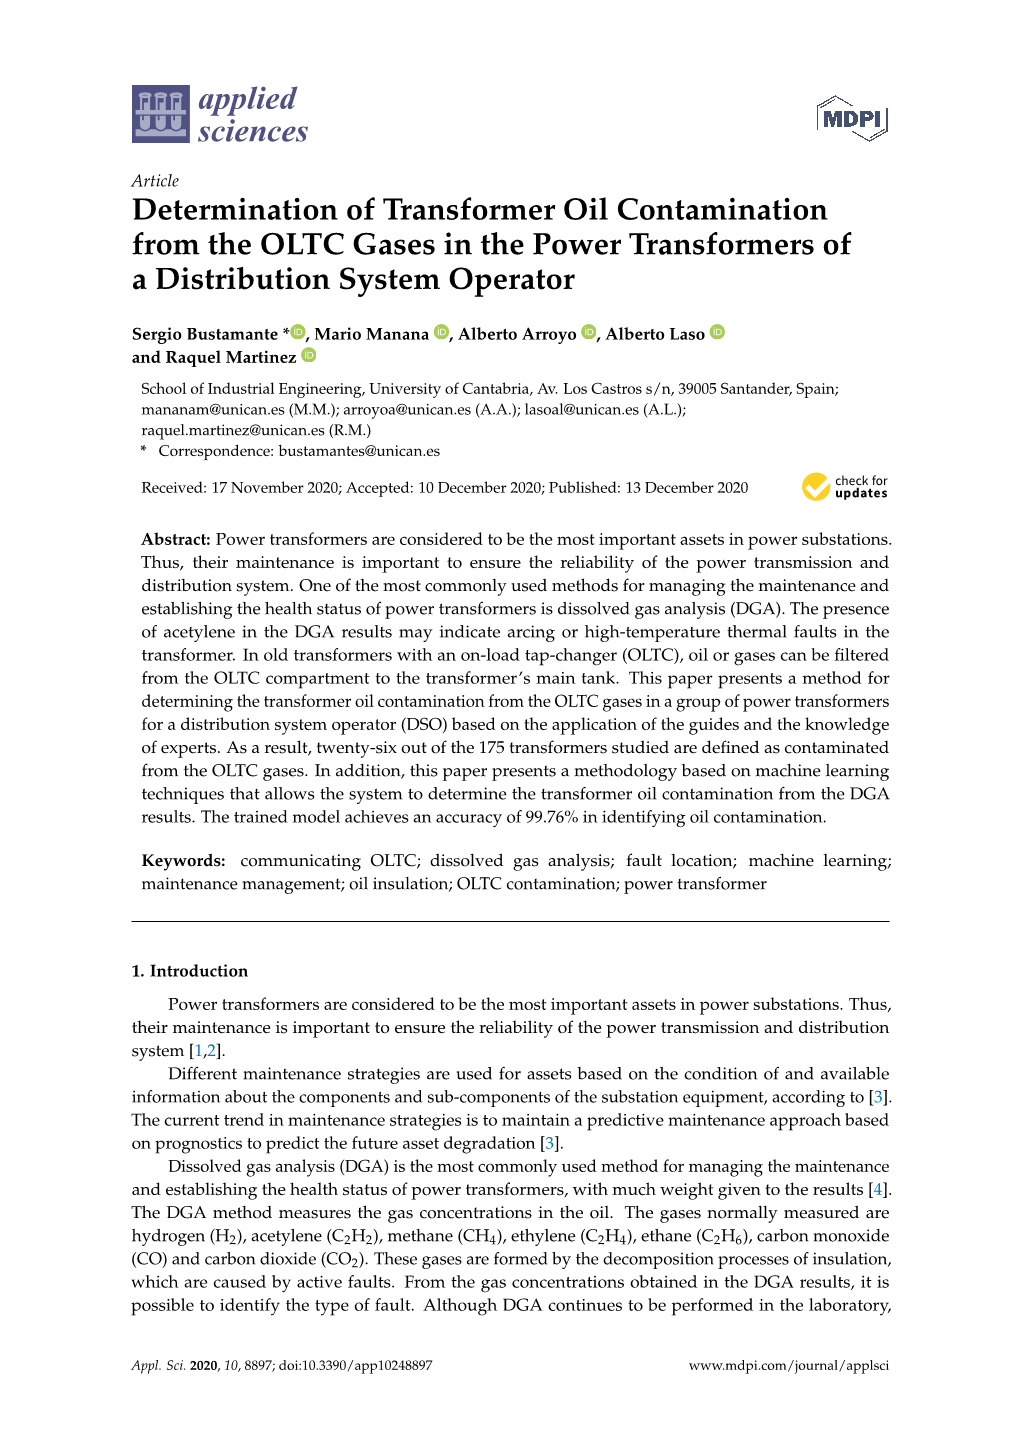 Determination of Transformer Oil Contamination from the OLTC Gases in the Power Transformers of a Distribution System Operator